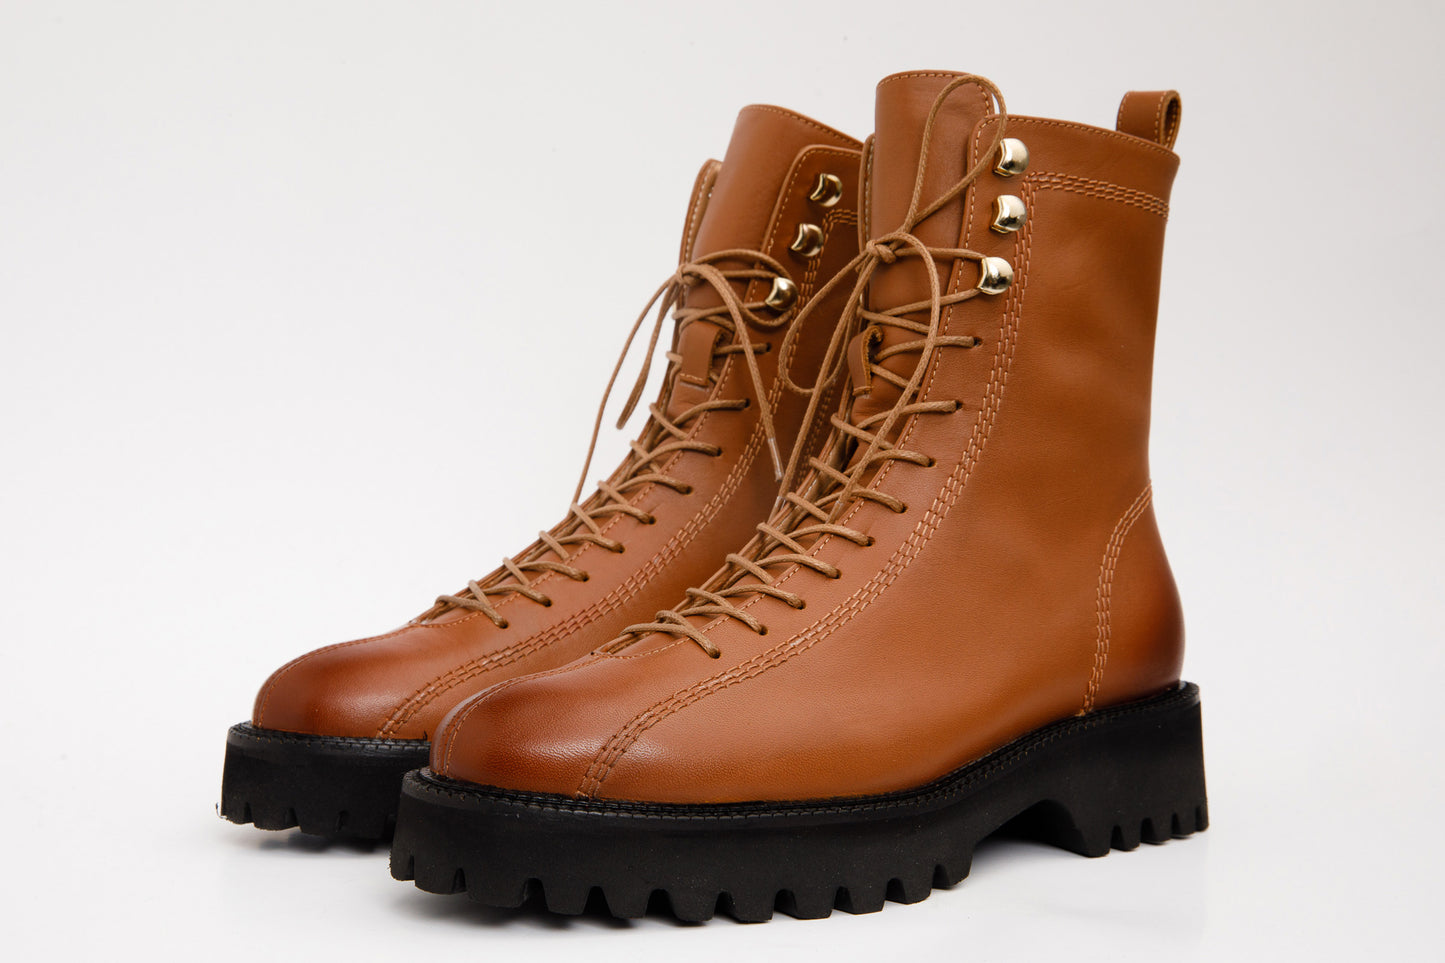 The Moreno Tan Leather Lace-Up Mid Calf Women Boot